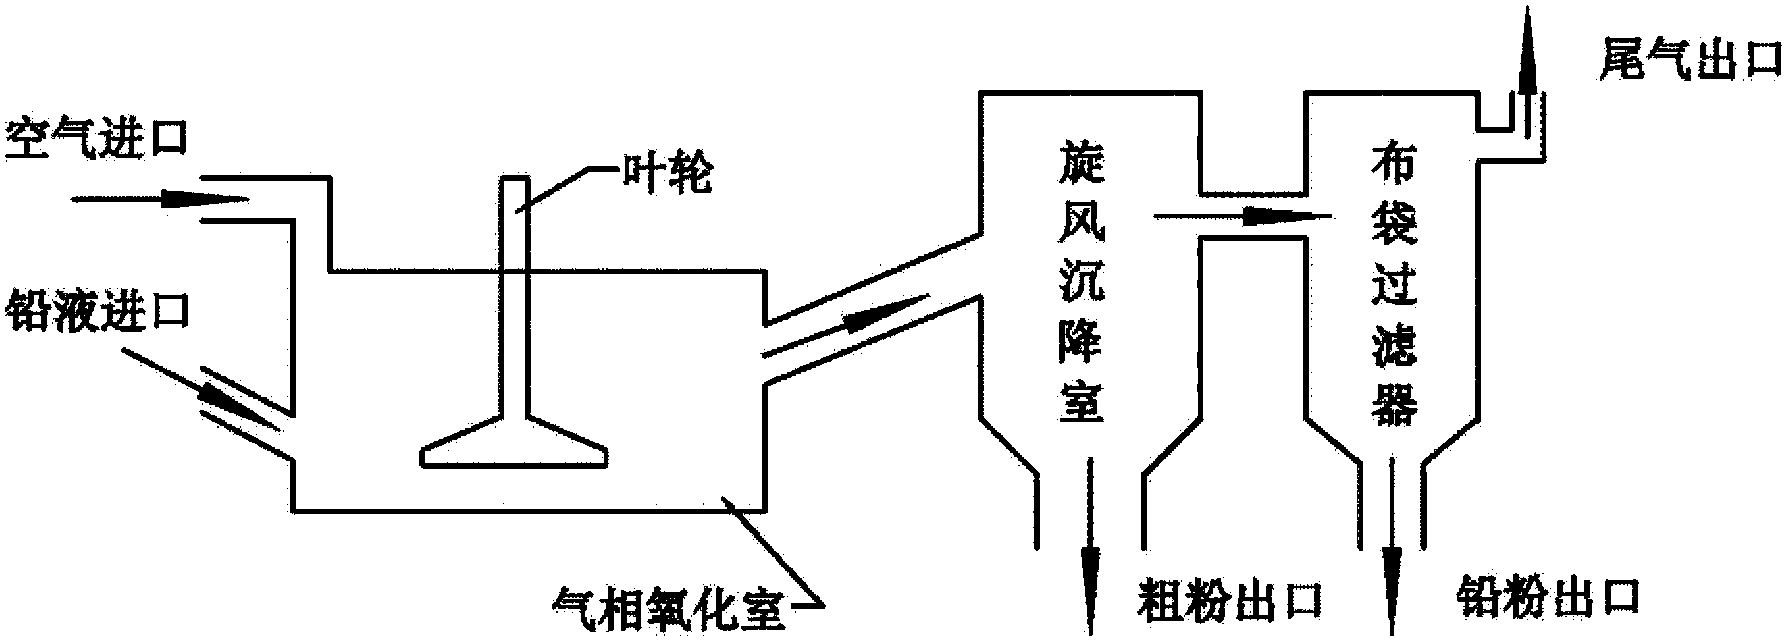 Methods and equipment for recovering waste diachylon by wet method and manufacturing electrode active material of high performance lead acid battery by wet method